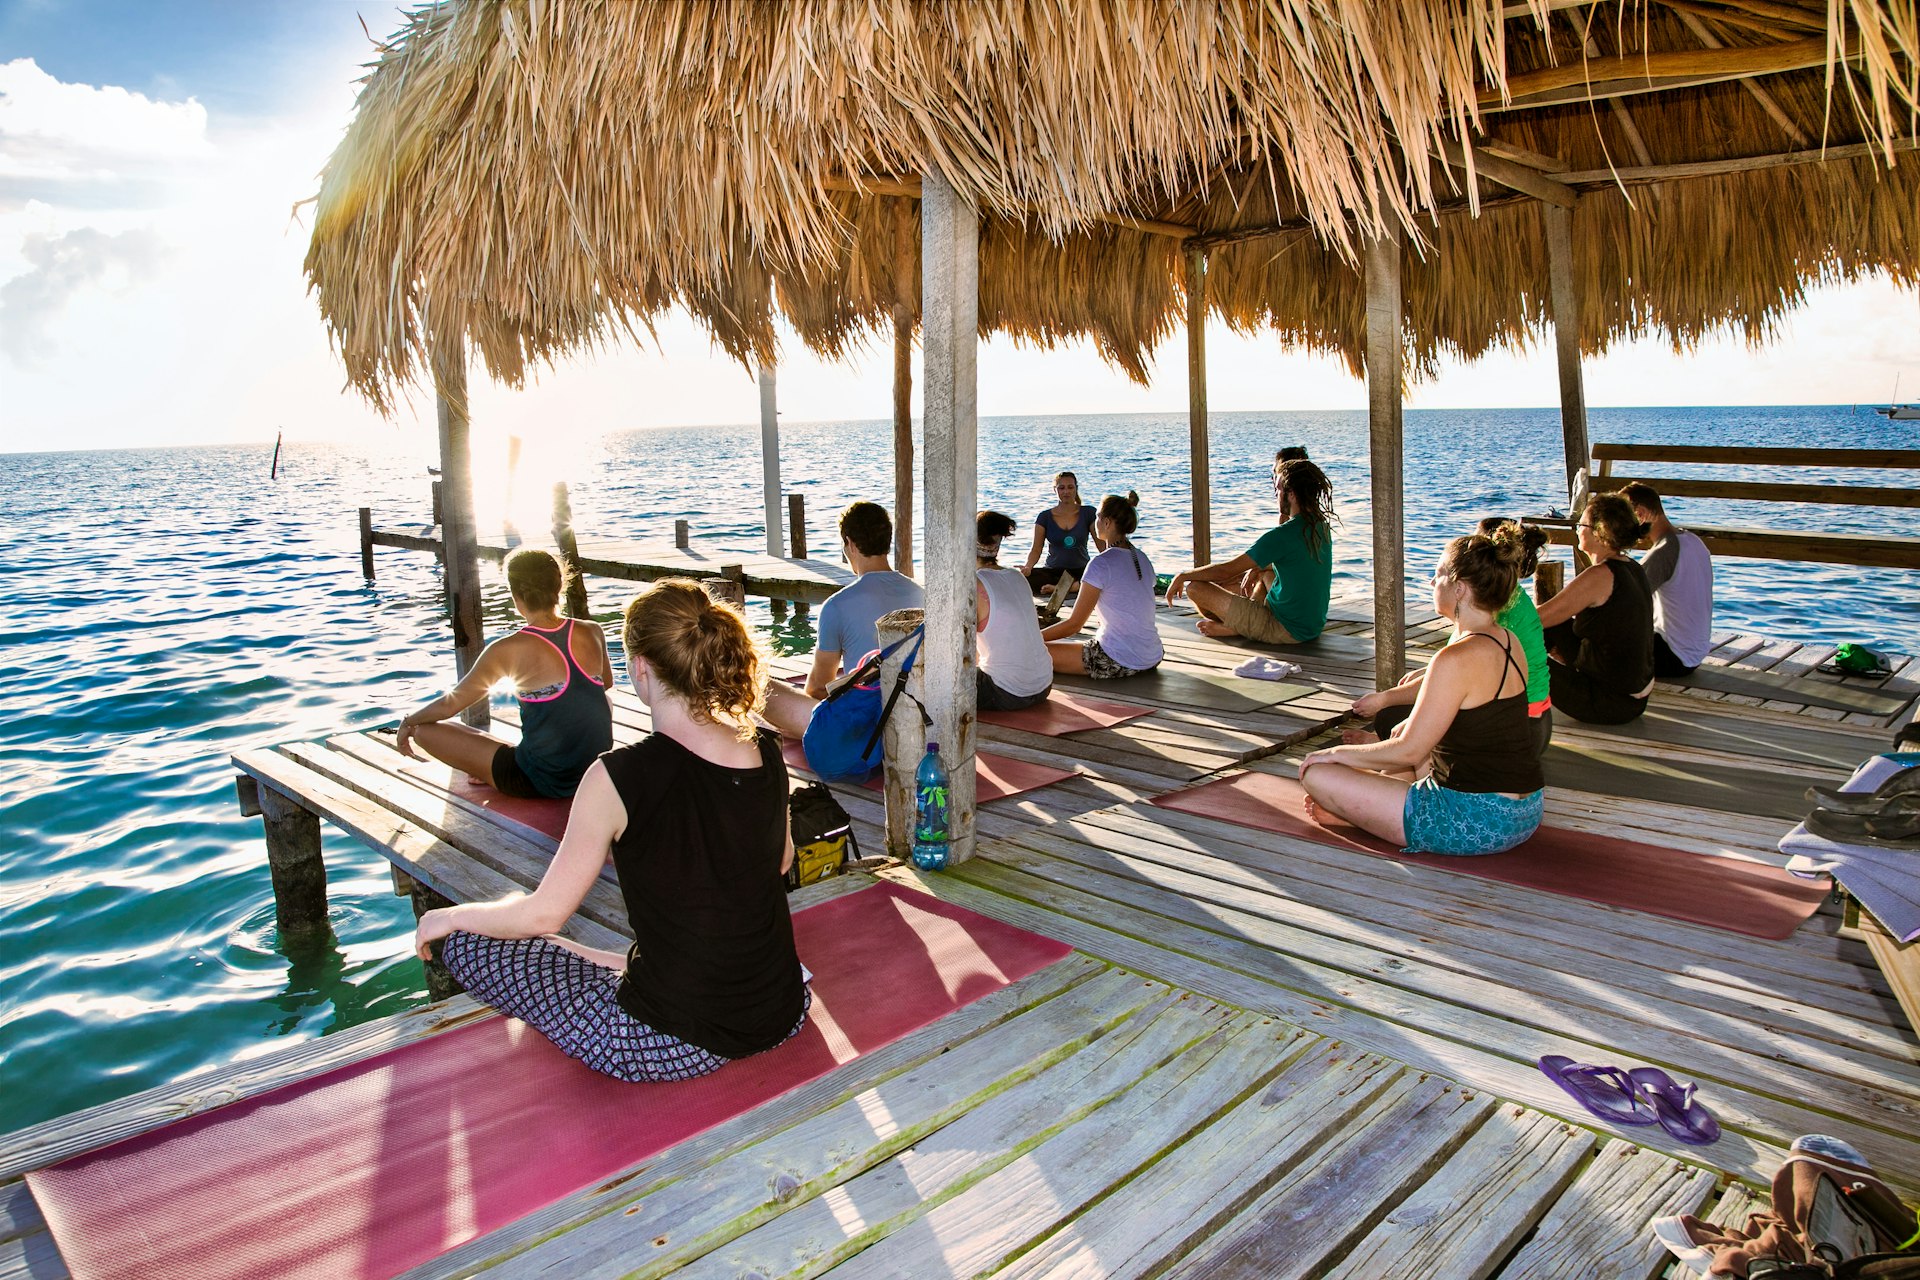 Yoga at dock of Caye Caulker island. Participants perform yoga moves outdoors by the sea.